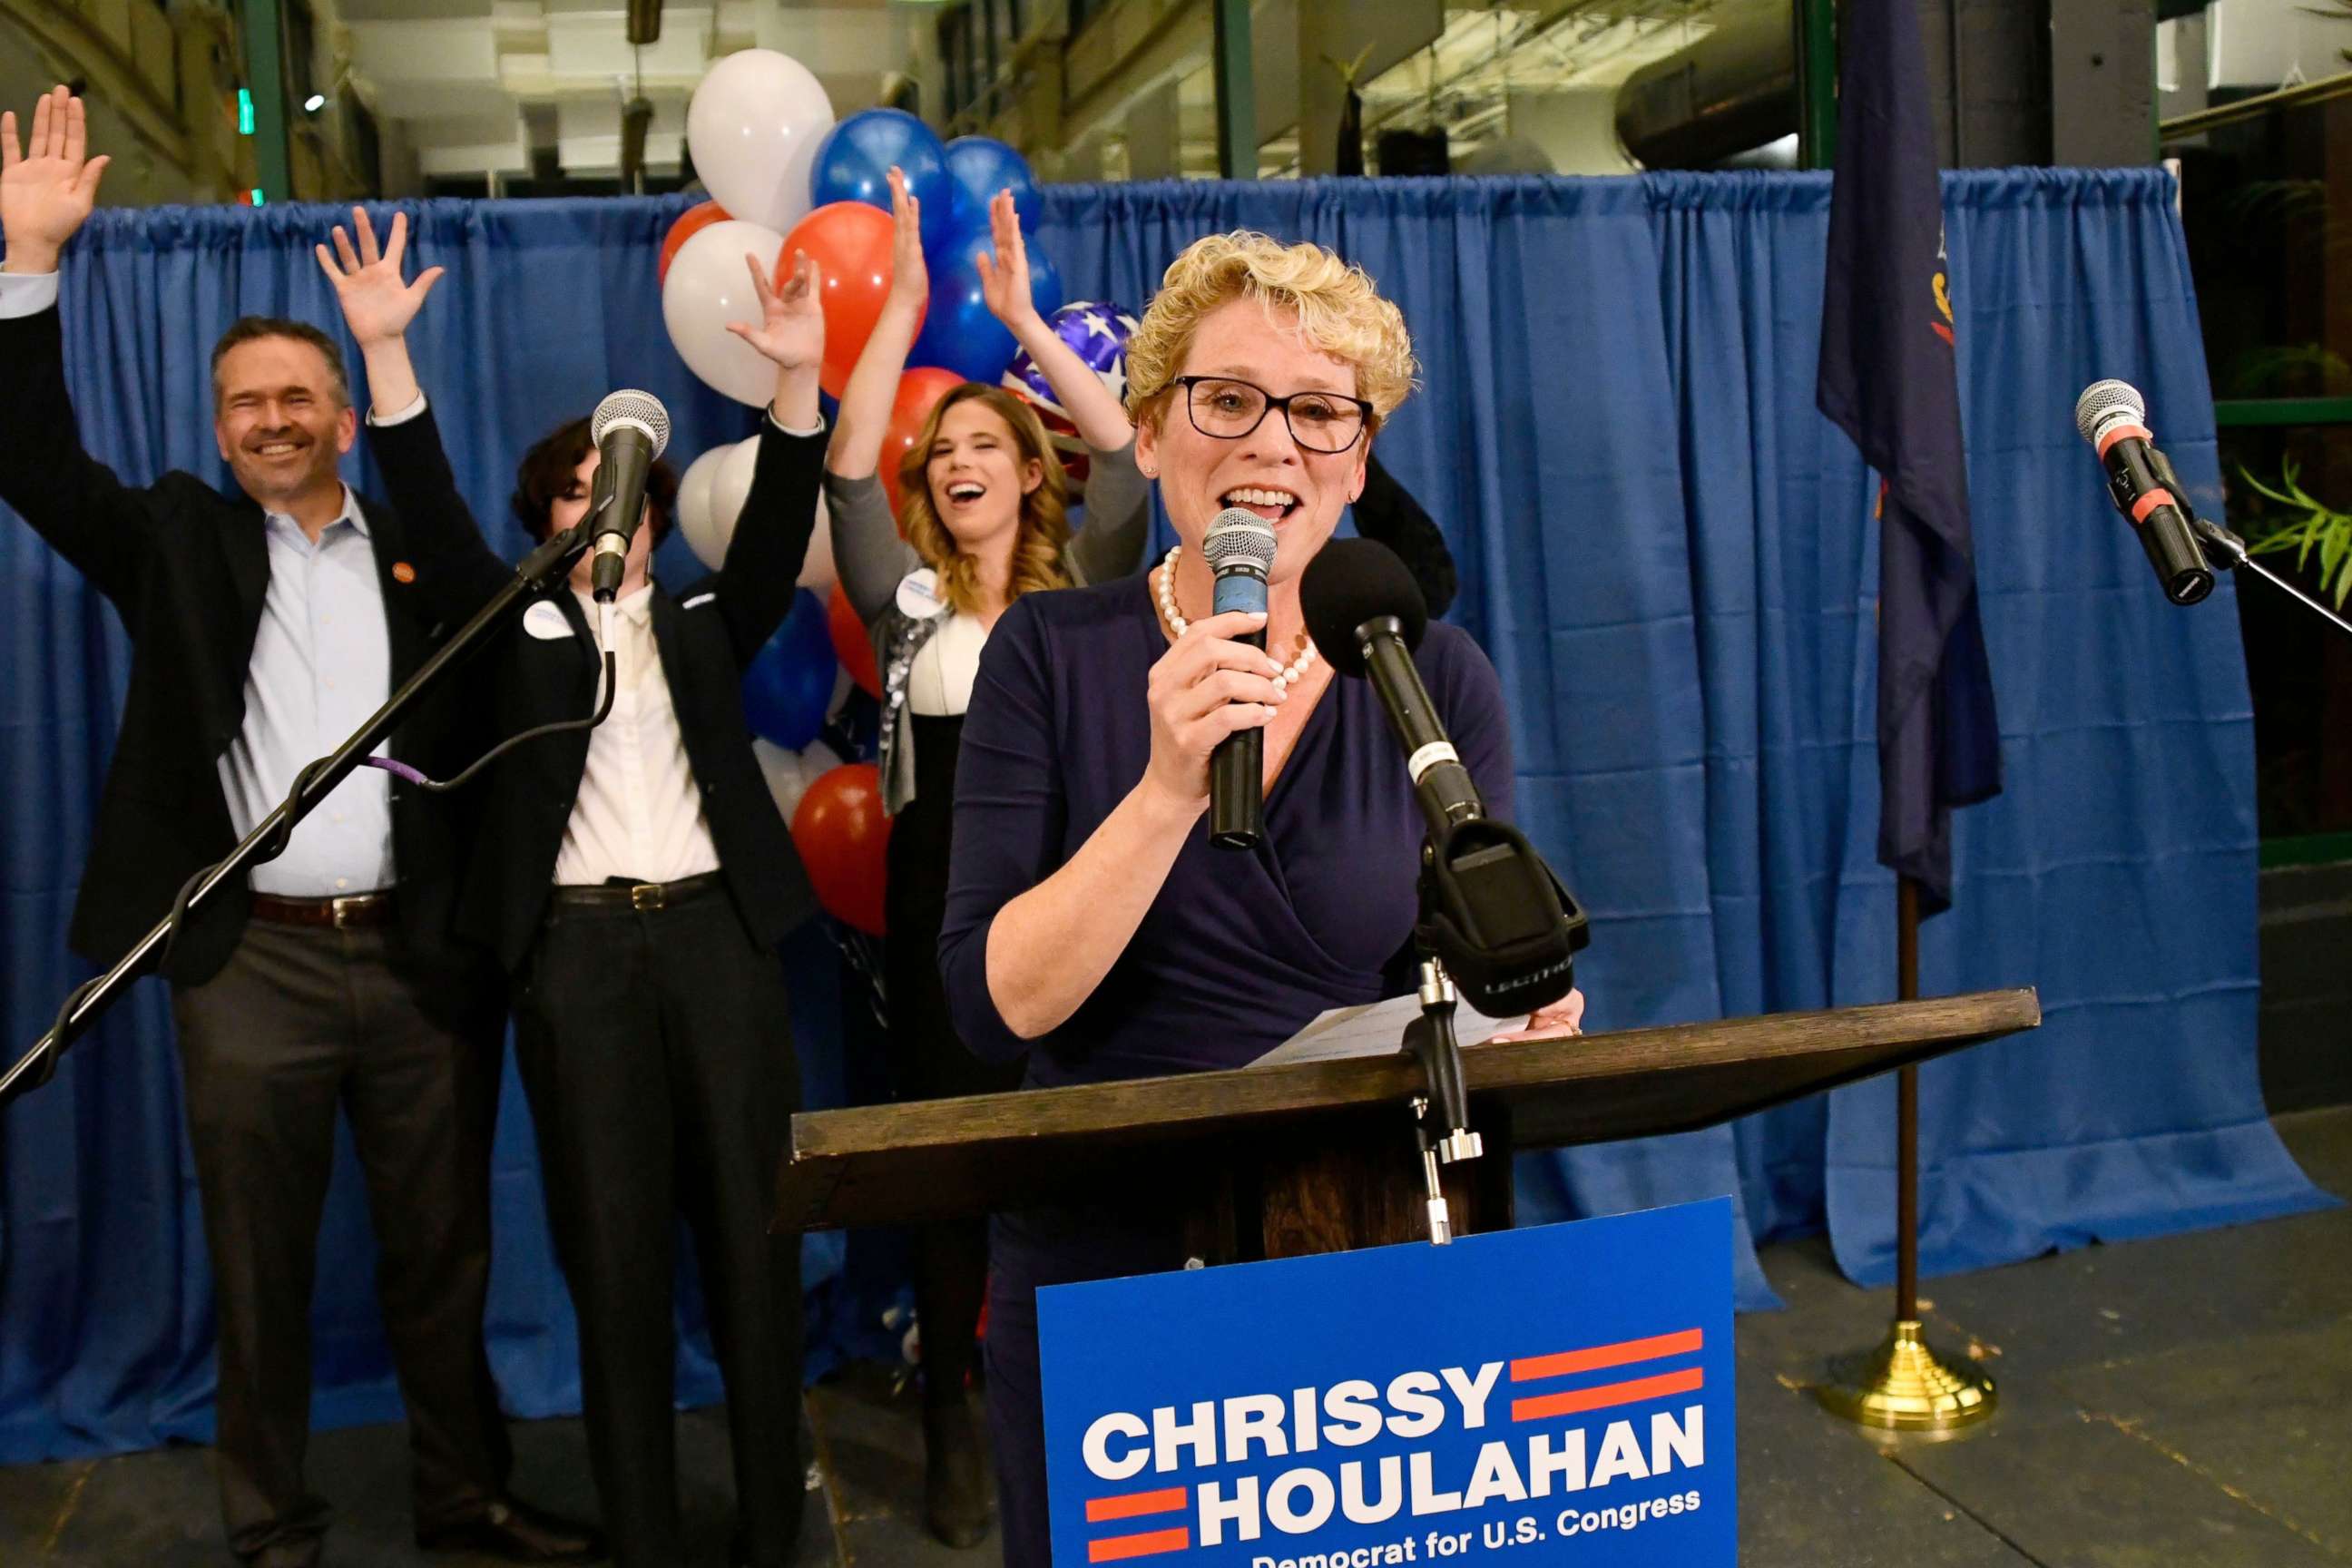 PHOTO: Democrat Chrissy Houlahan declares victory over Republican Greg McCauley at her election night headquarters during the 2018 mid-term general election in Phoenixville, Pennsylvania, Nov. 6, 2018.